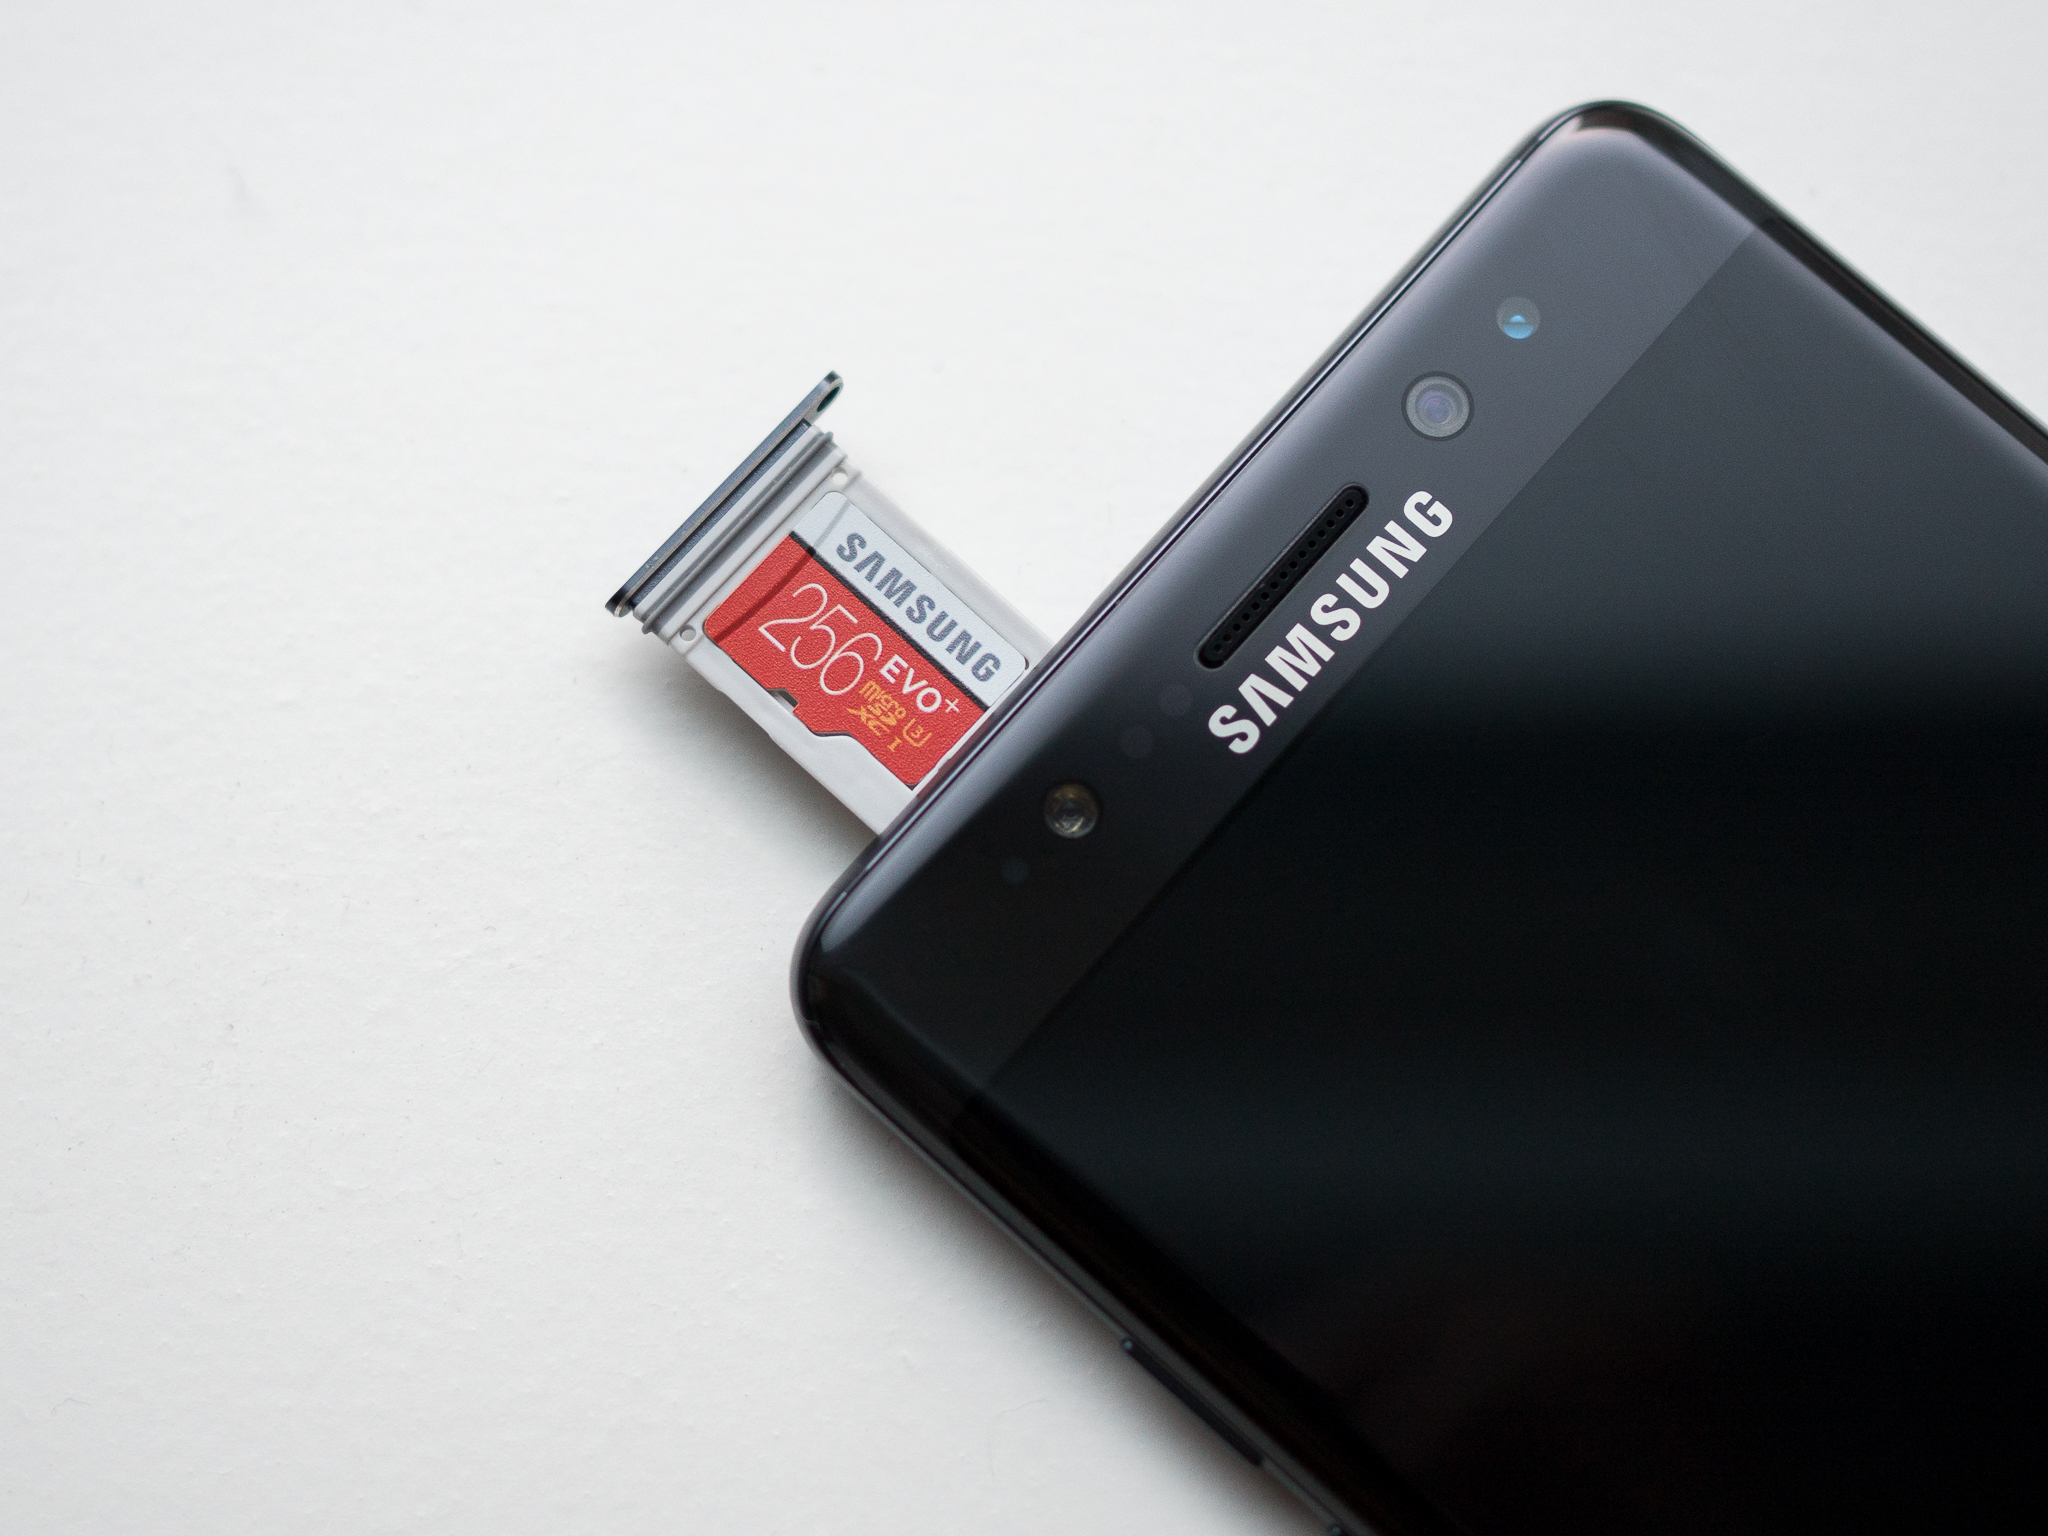 Microsd Slot For Up To 256gb